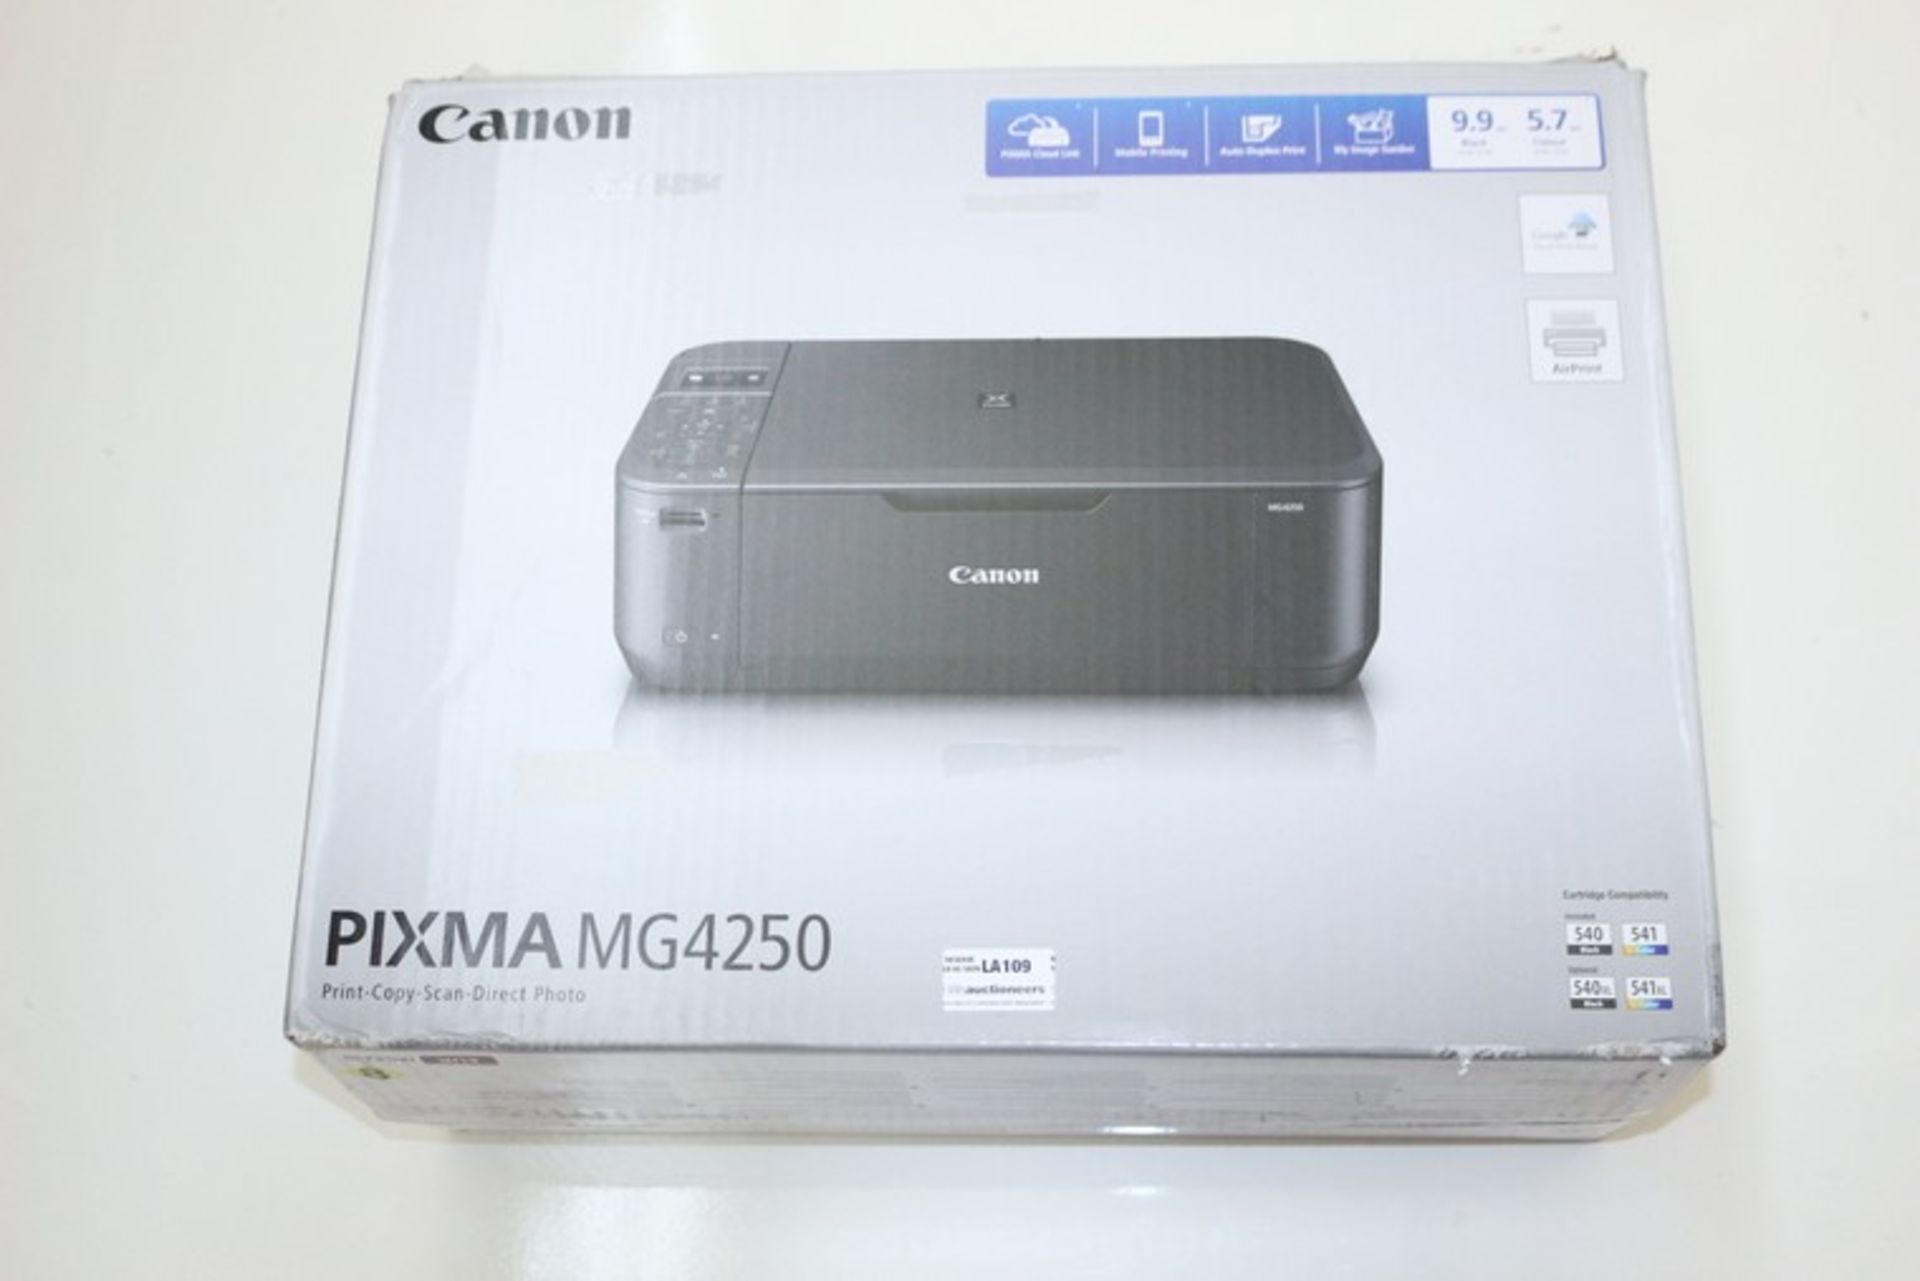 1 x BOXED CANON PIXMA MG4250 ALL IN ONE PRINTER SCANNER COPIER RRP £45 *PLEASE NOTE THAT THE BID